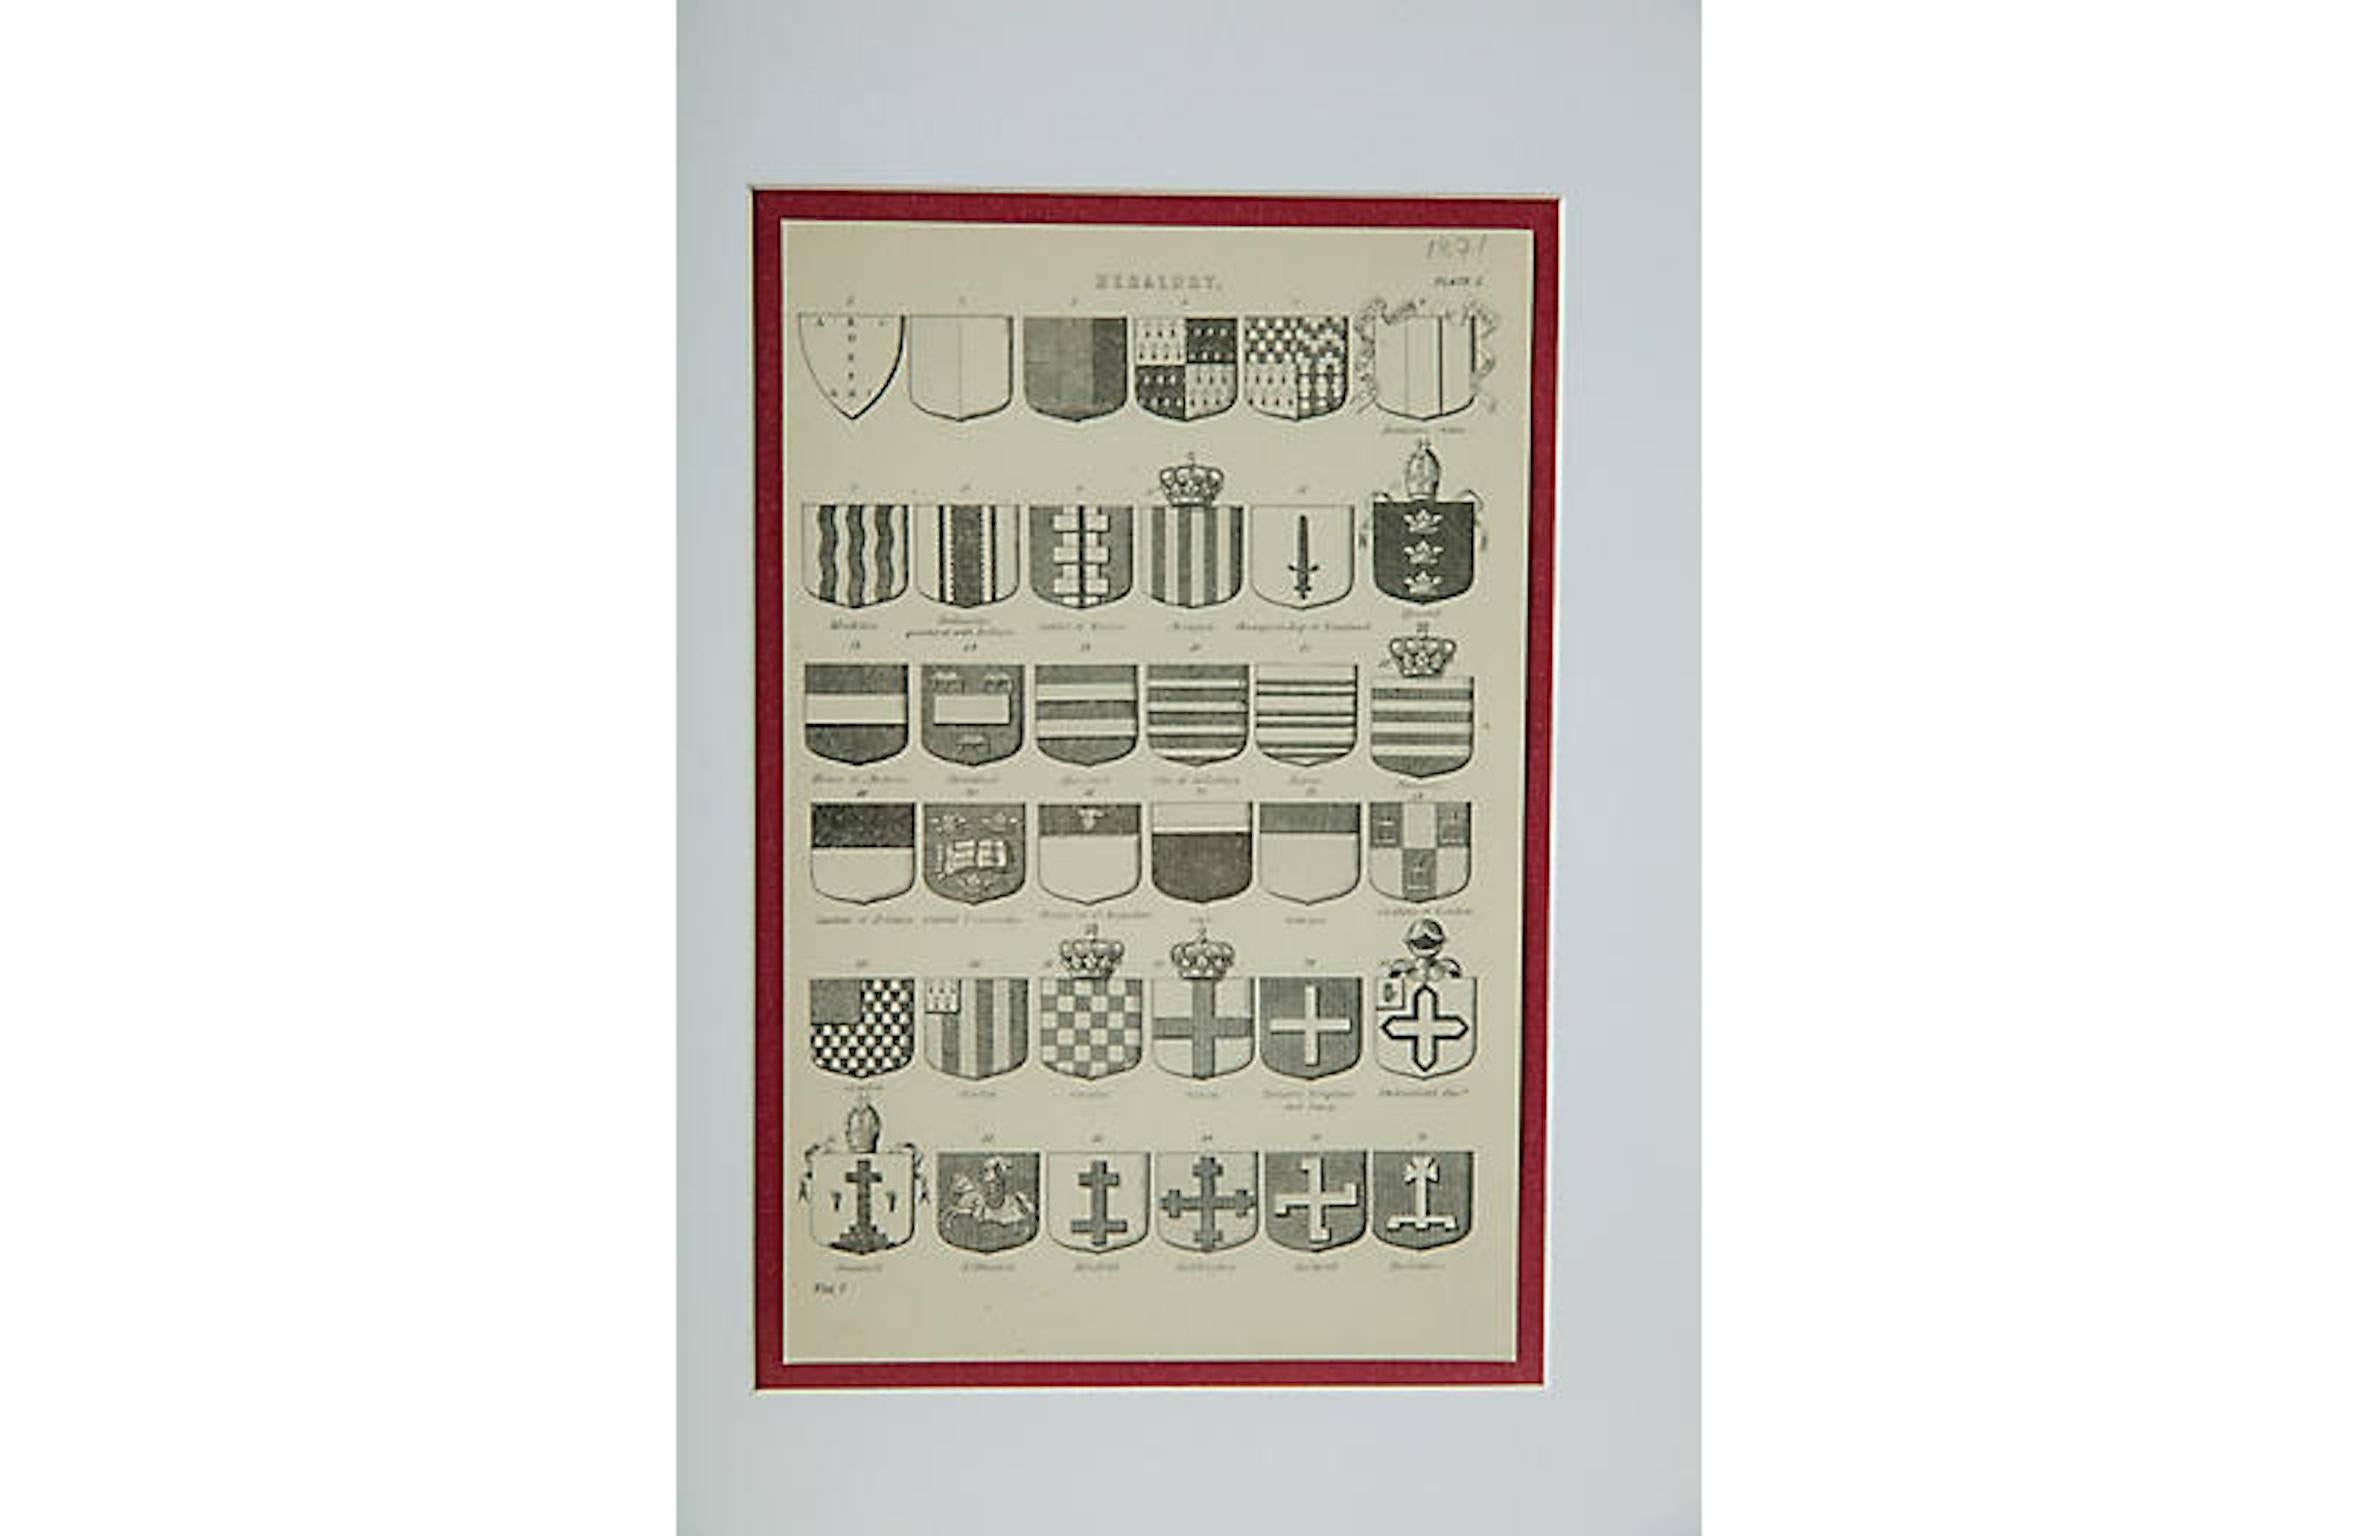 Set of late 19th century black-and-white prints of various English coats of arms. New white-painted wood frames with red and white archival double matting. Hanging wire included. Each dated 1871.